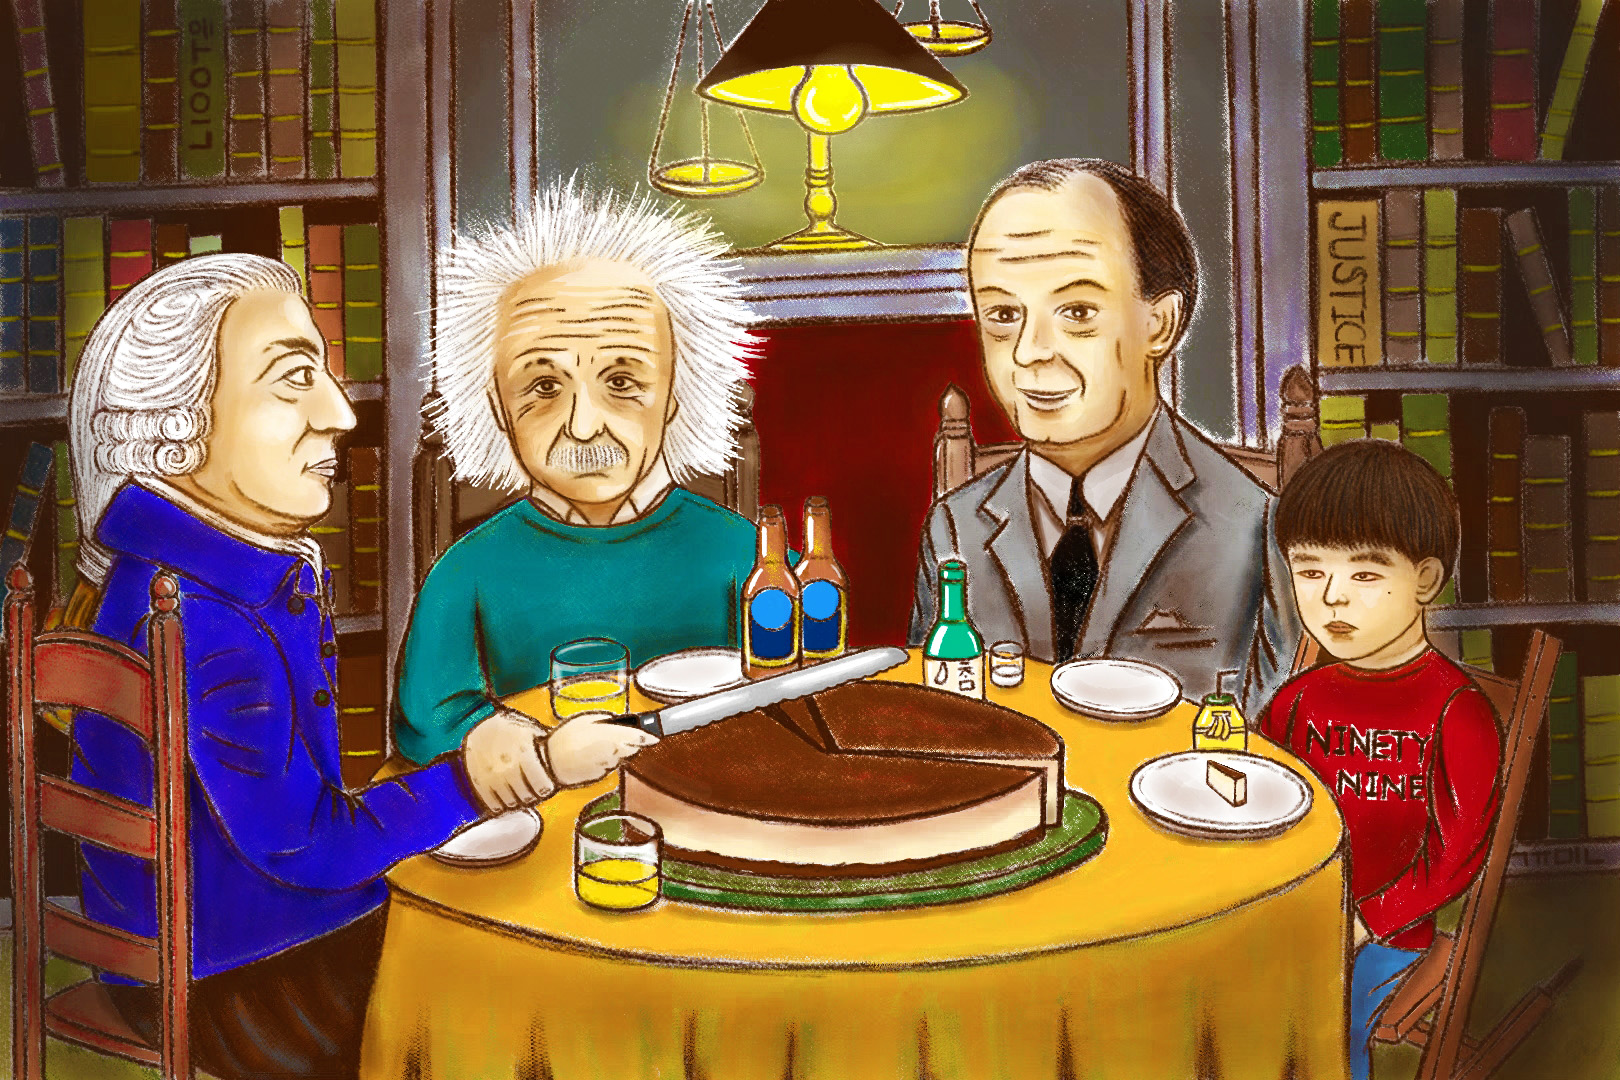 Cake-cutting using the Boltzmann division. When the economist Adam Smith (leftmost) tries to split a cake, the physicist Einstein (second left) urges him to think again. Finding an answer as to how to farily divide this cake is not easy, considering Von Neumann (third left) who had greatly contributed to the development of humankind, and the child who represents 99% of the world's population are both at present. l Image Credit: Dr. JiWon Park